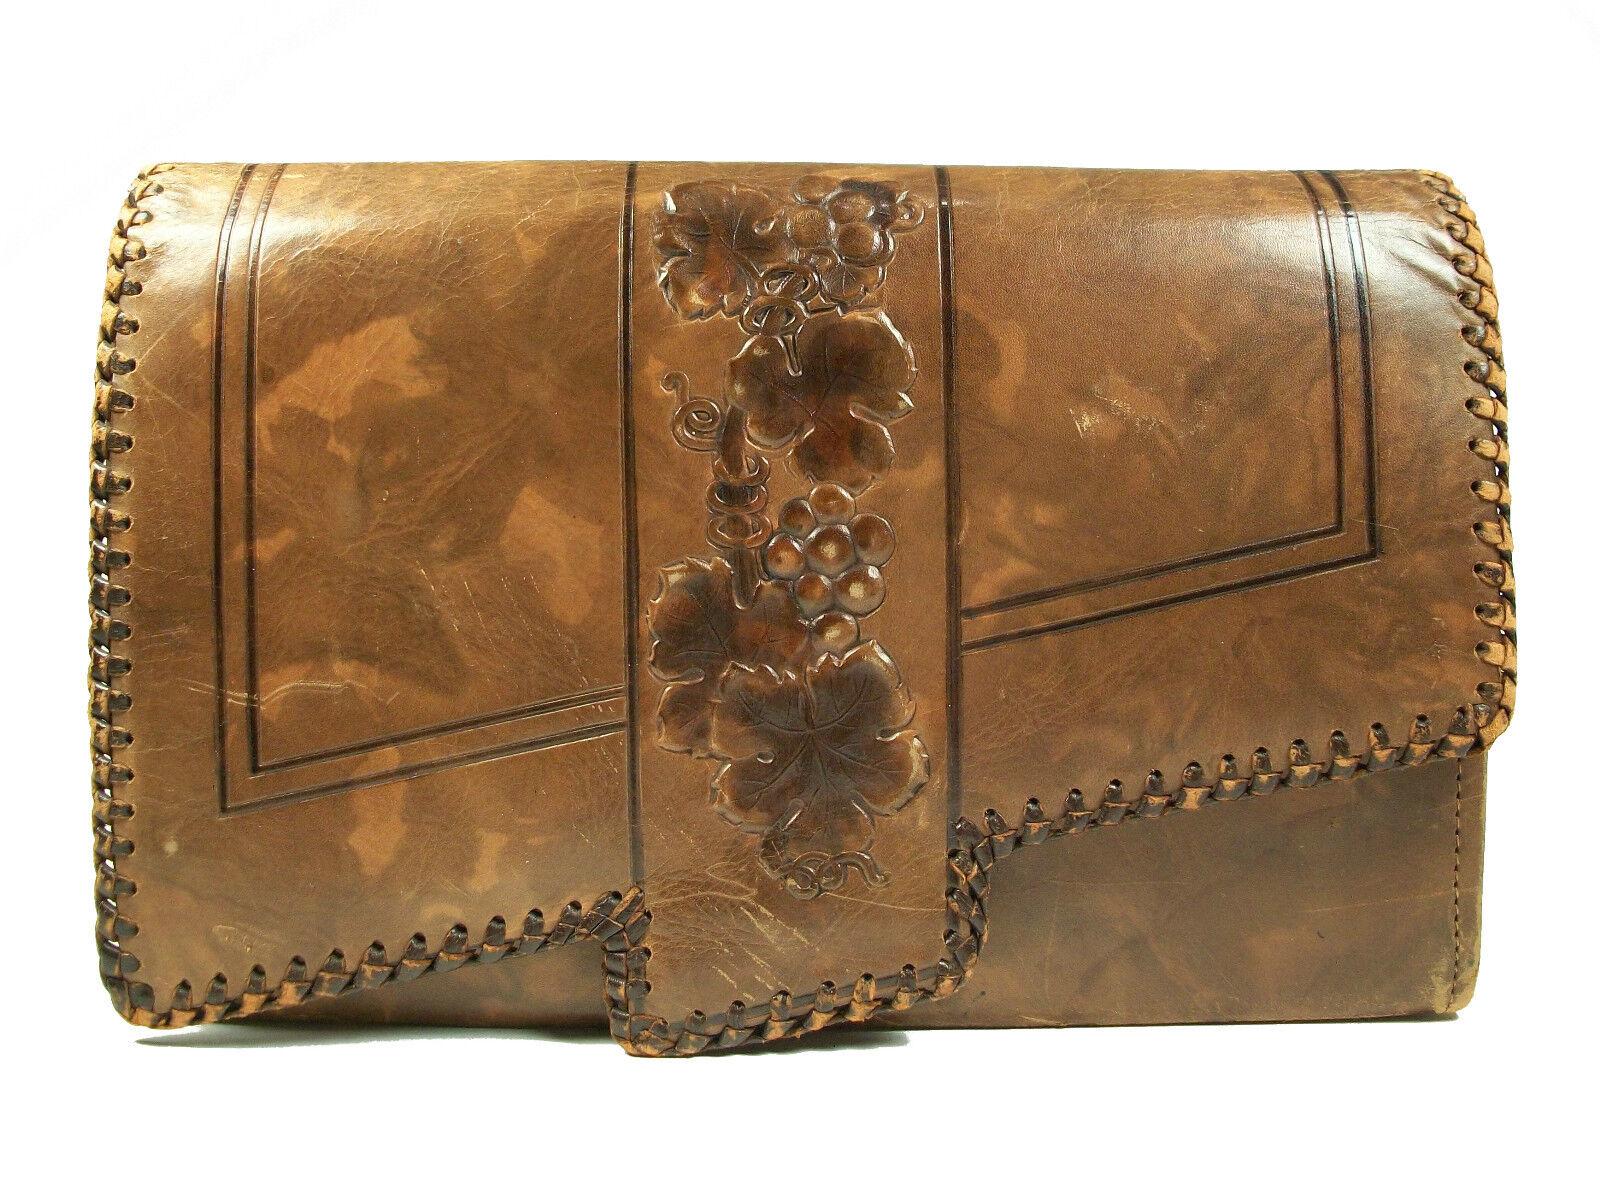 English ARDEN FOREST - Vintage Tooled Leather Clutch - Whip-stitched Edge - Circa 1930's For Sale